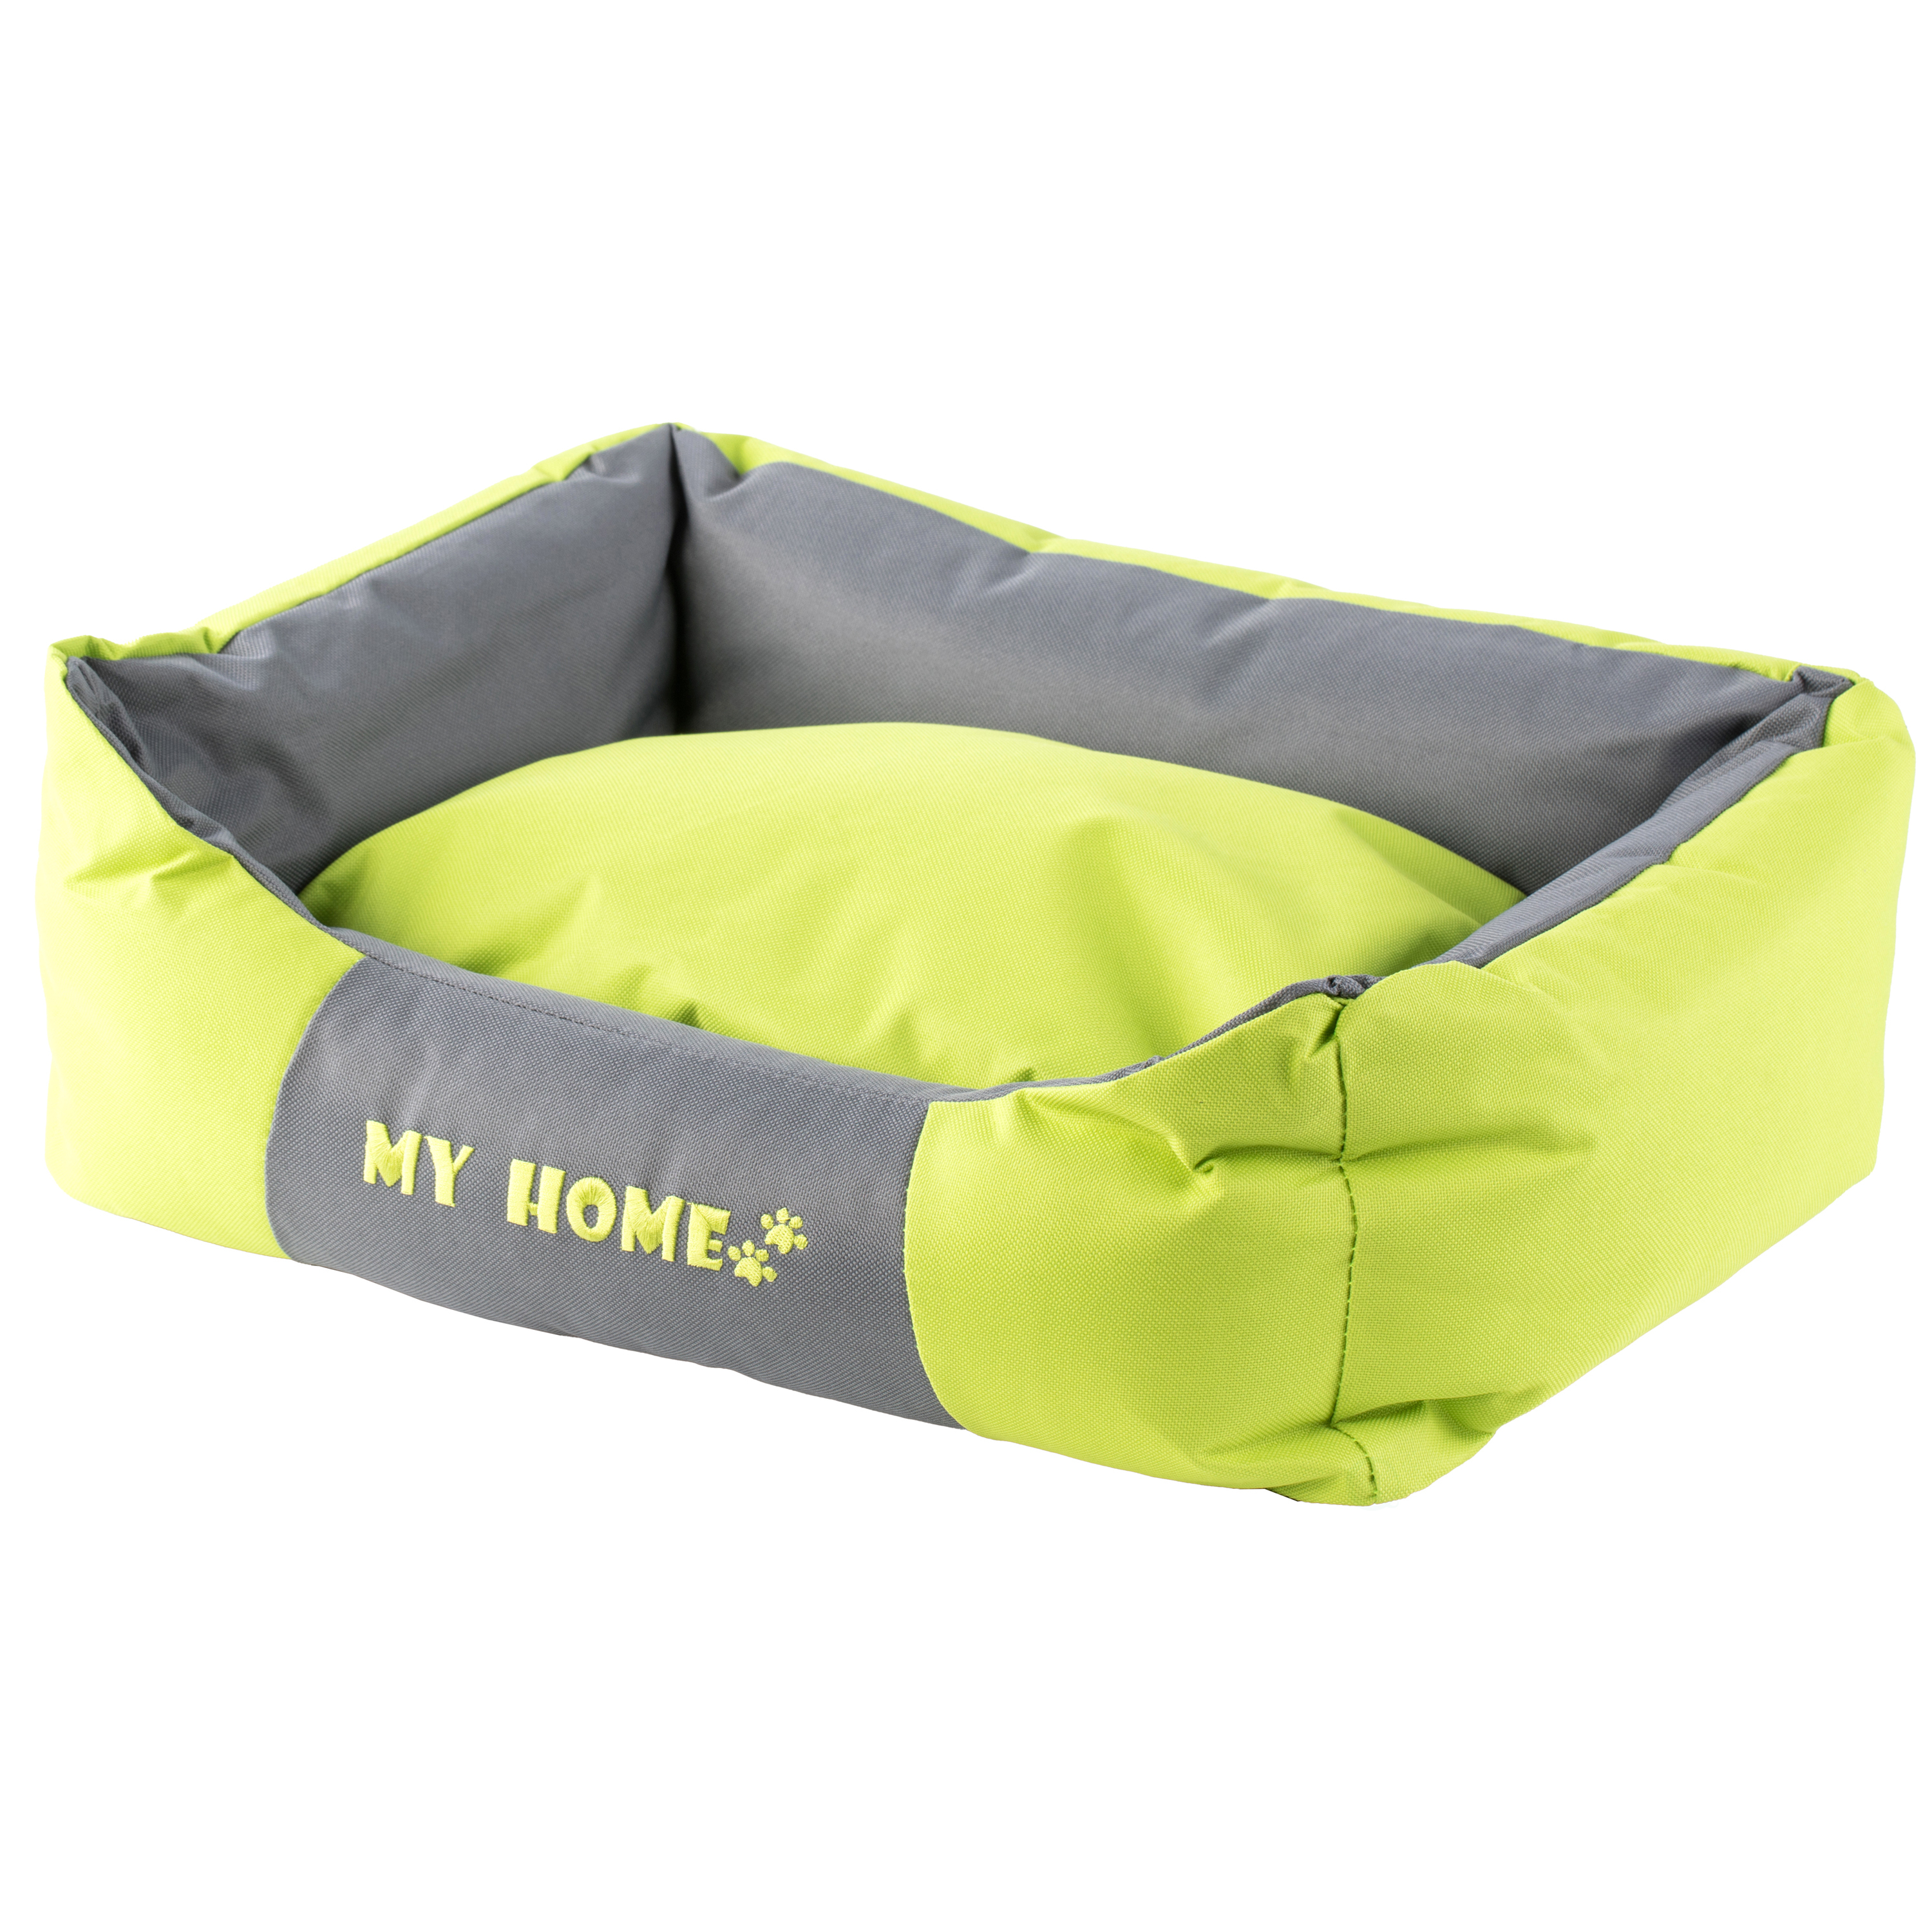 Water-Resistant Rectangular Oxford Ped Bed For Cats And Dogs